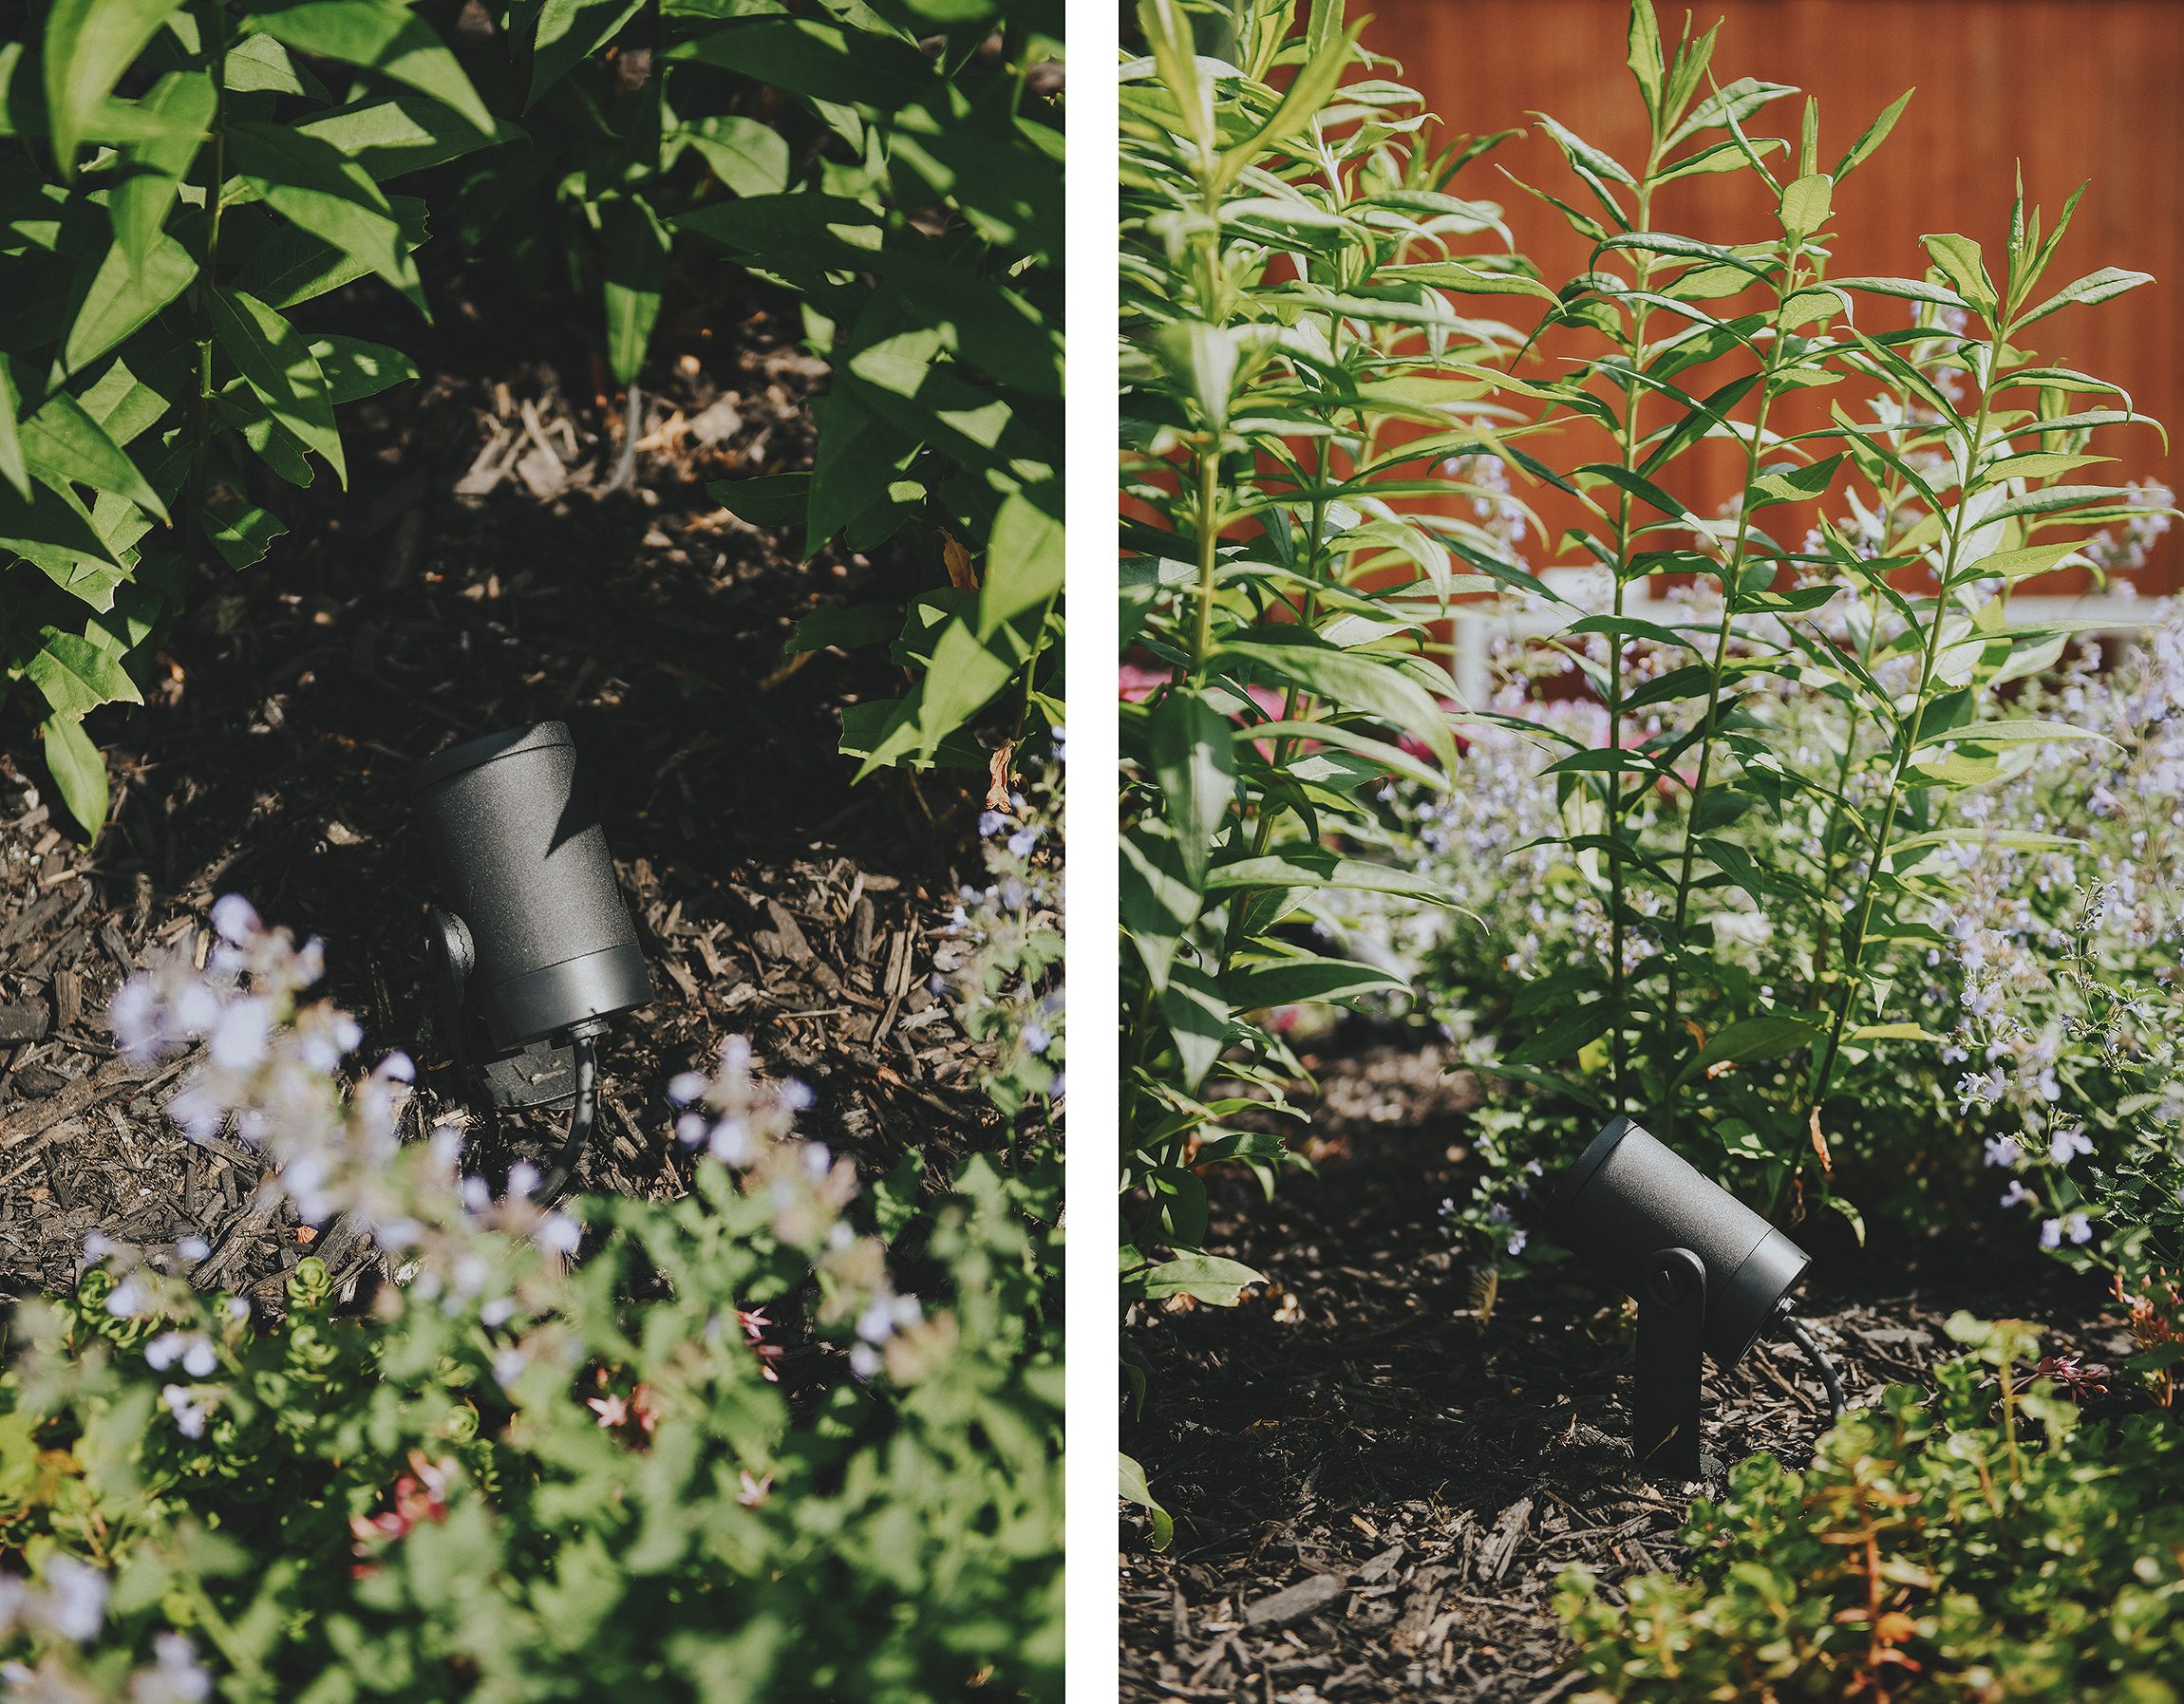 philips hue lily spotlights blend right into the black mulch of our landscaping // via yellow brick home